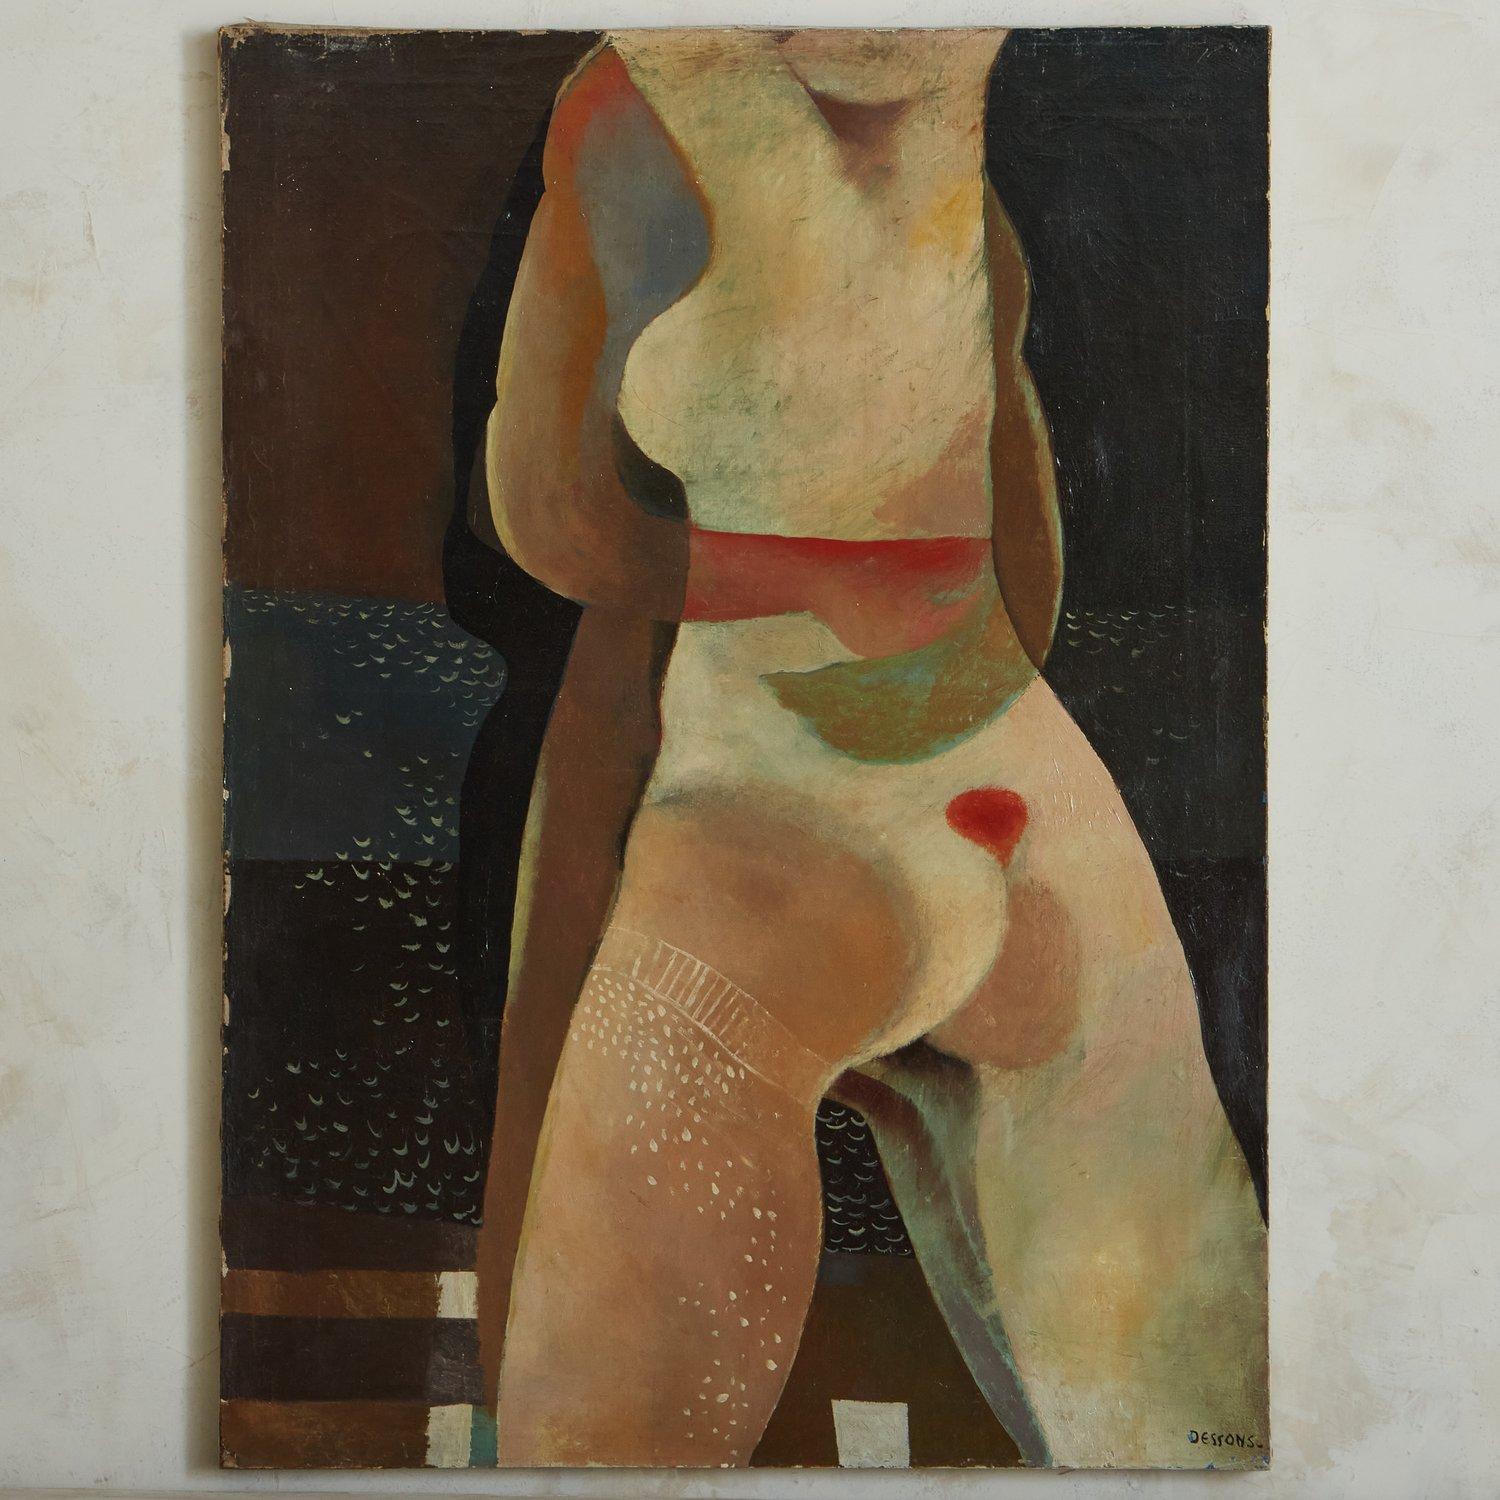 A Mid Century figural painting on canvas by Pierre Dessons featuring rich earthy hues. Signed ‘Dessons’ lower right corner. Sourced in France, 1970s.

Pierre Dessons is a French Postwar & Contemporary painter born in 1936.

